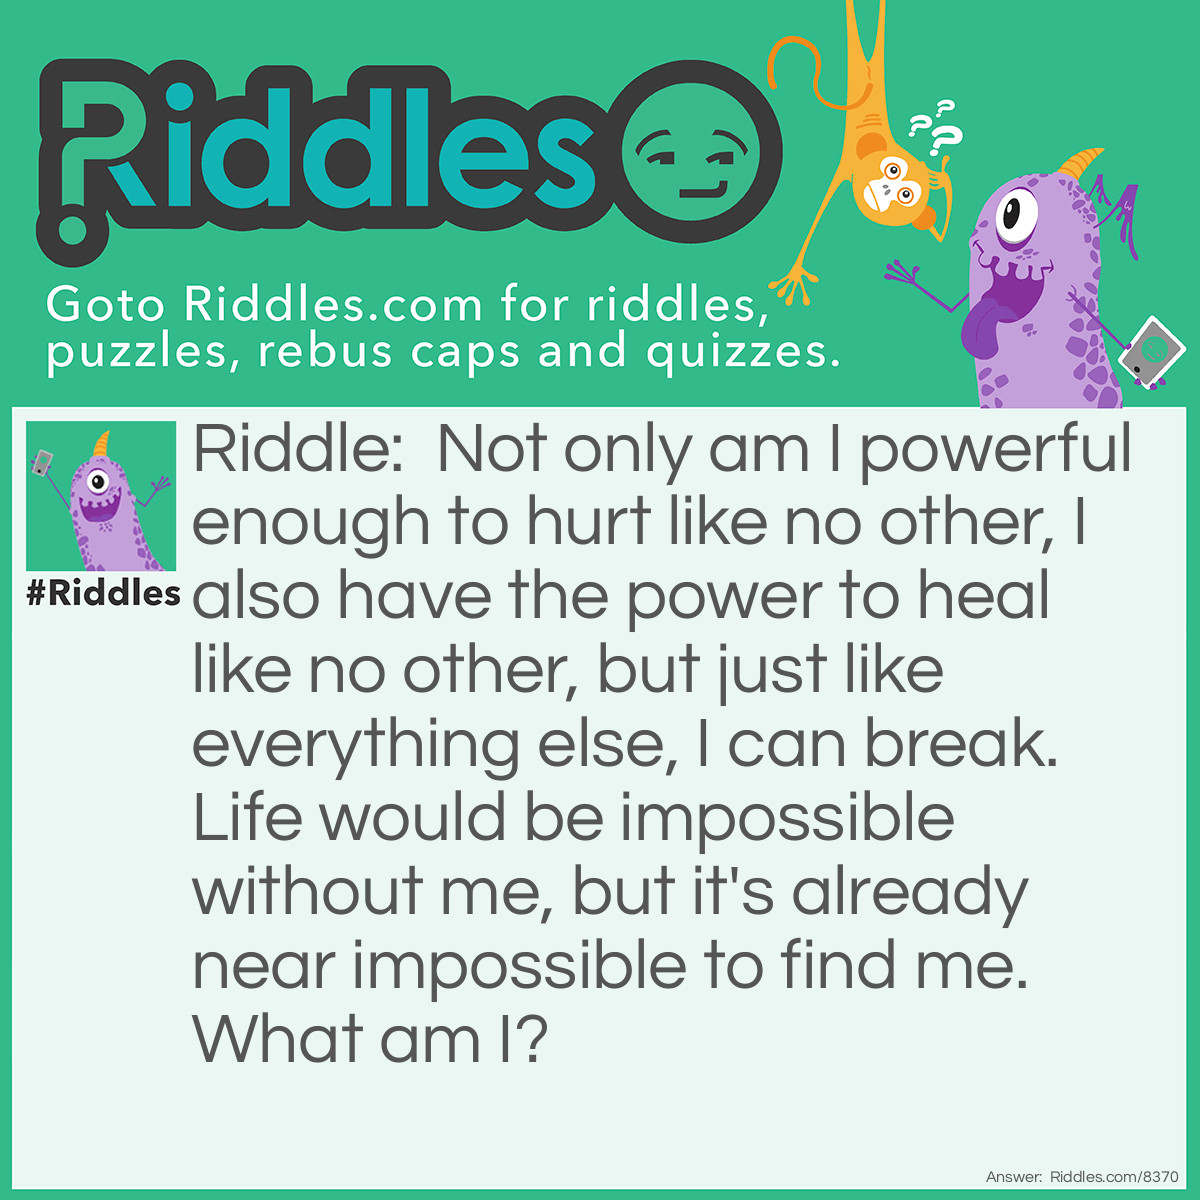 Riddle: Not only am I powerful enough to hurt like no other, I also have the power to heal like no other, but just like everything else, I can break. Life would be impossible without me, but it's already near impossible to find me. What am I? Answer: True love.